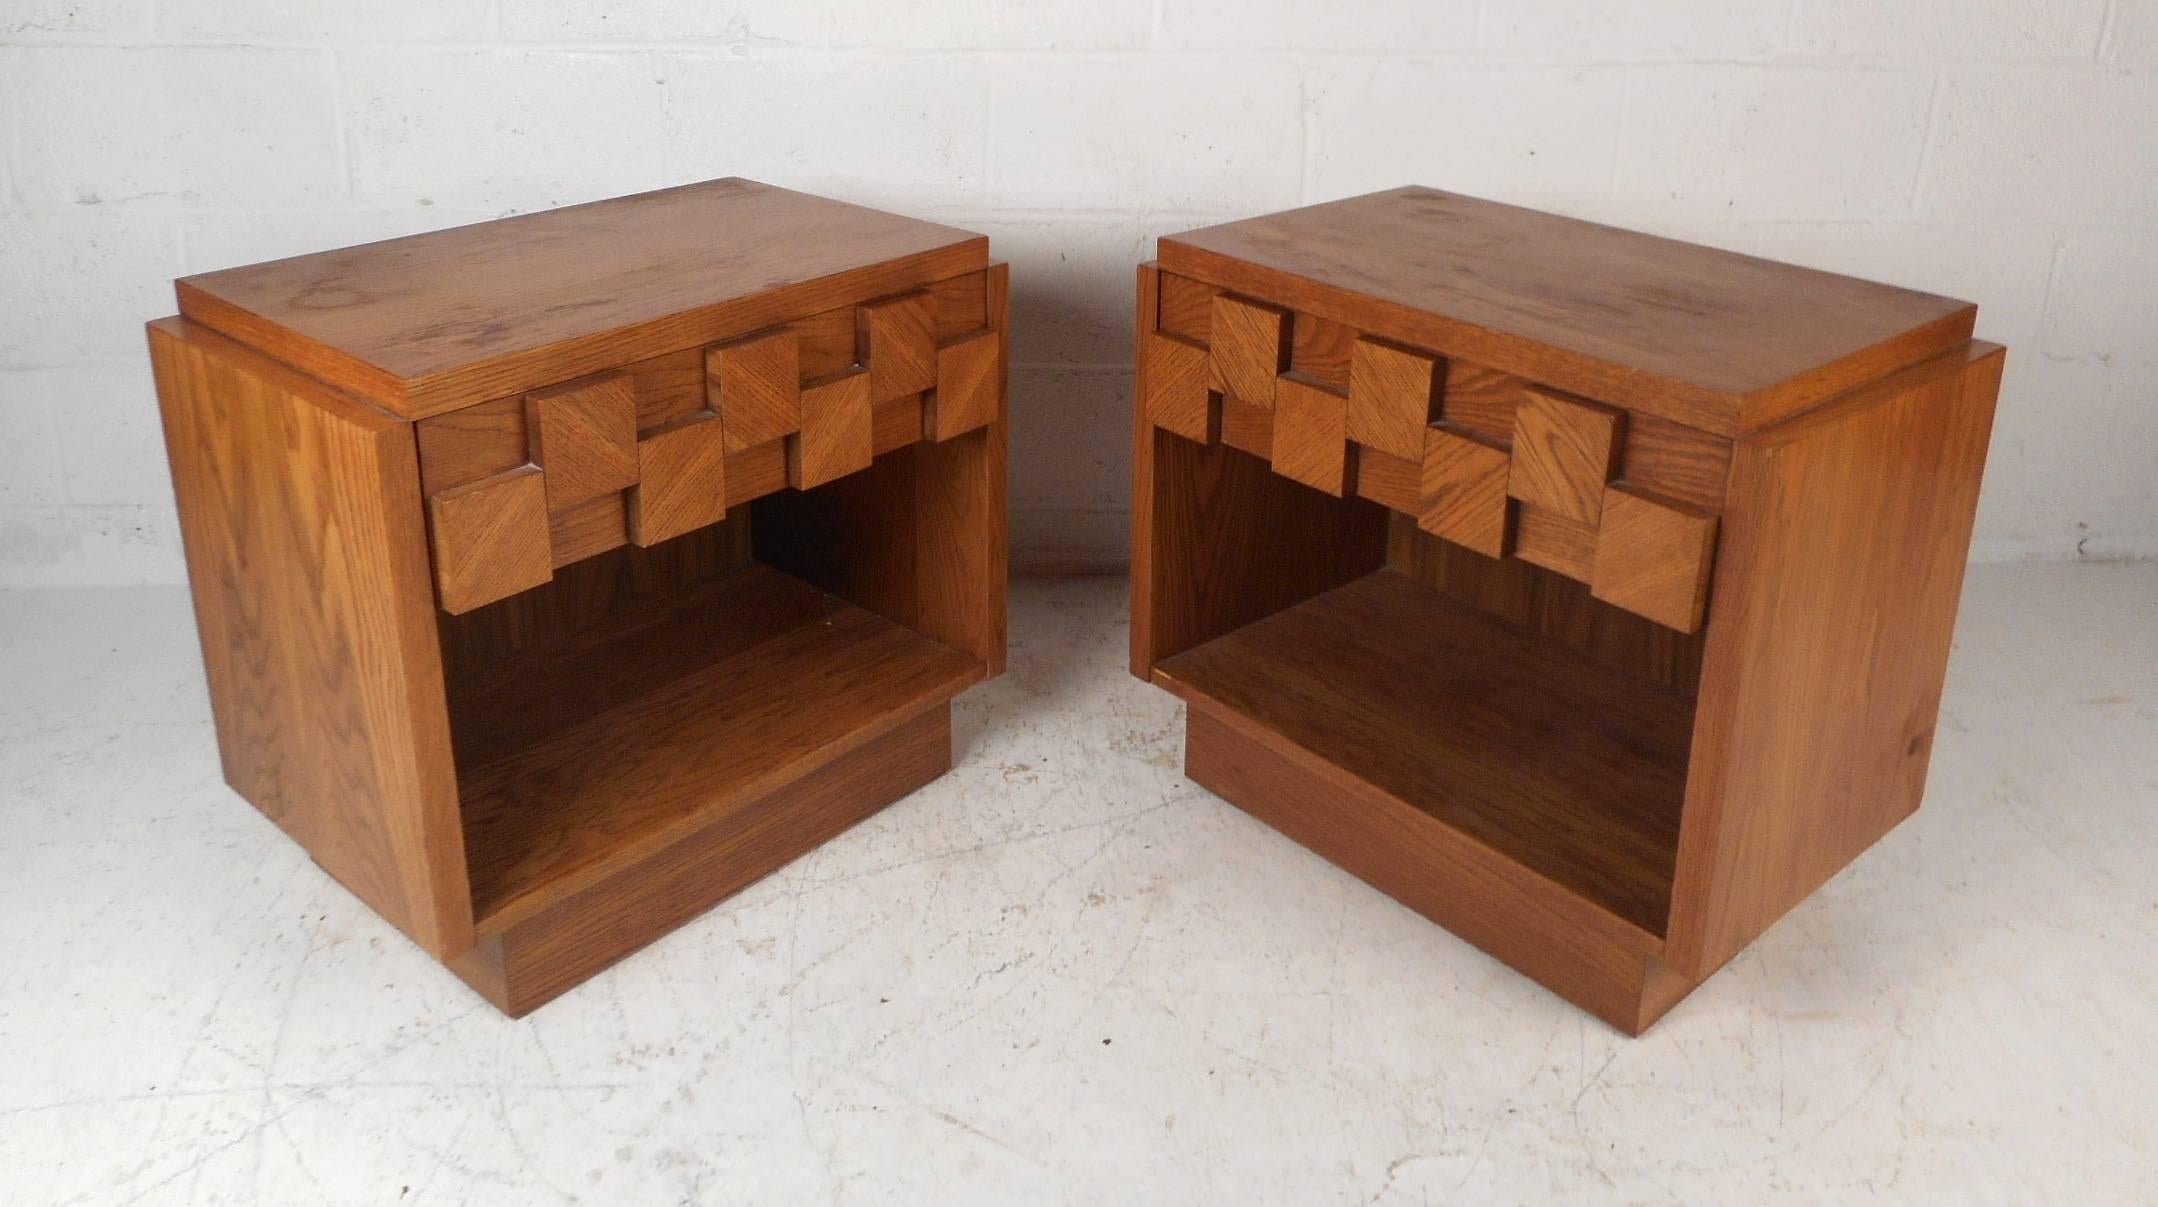 This gorgeous pair of vintage modern nightstands feature one hefty drawer with a large open compartment underneath. Sleek design with a unique Brutalist front and a raised tabletop. This fabulous pair of midcentury end tables make the perfect